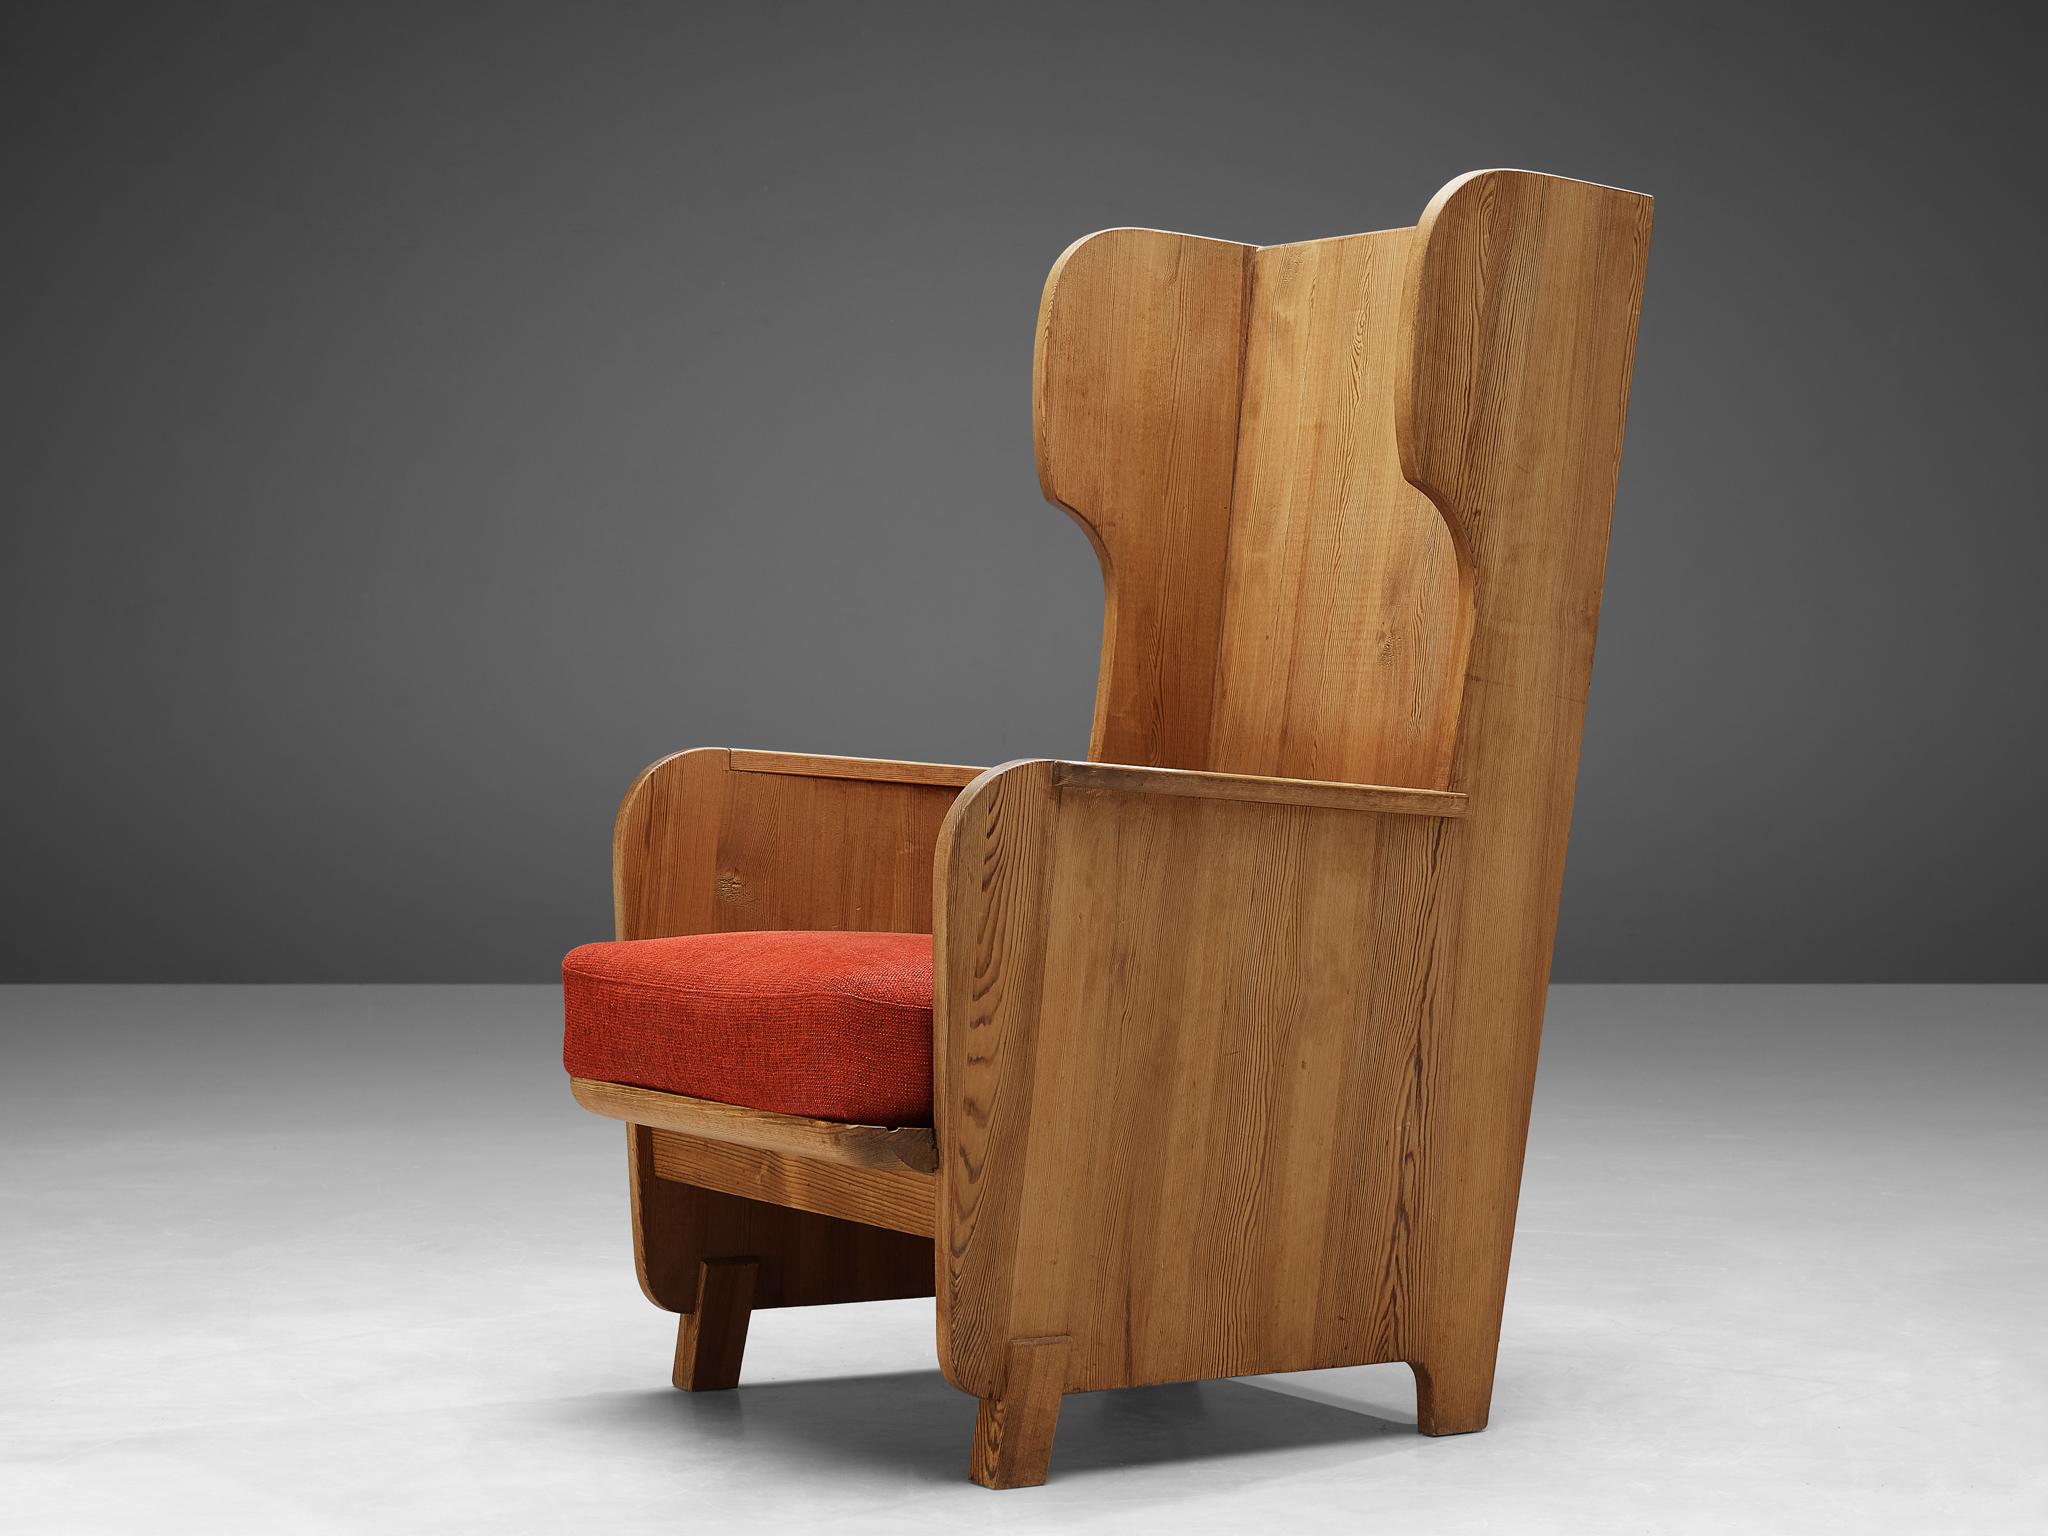 Mid-20th Century Axel Einar Hjorth 'Lovö' Lounge Chair in Solid Pine with Red Cushions